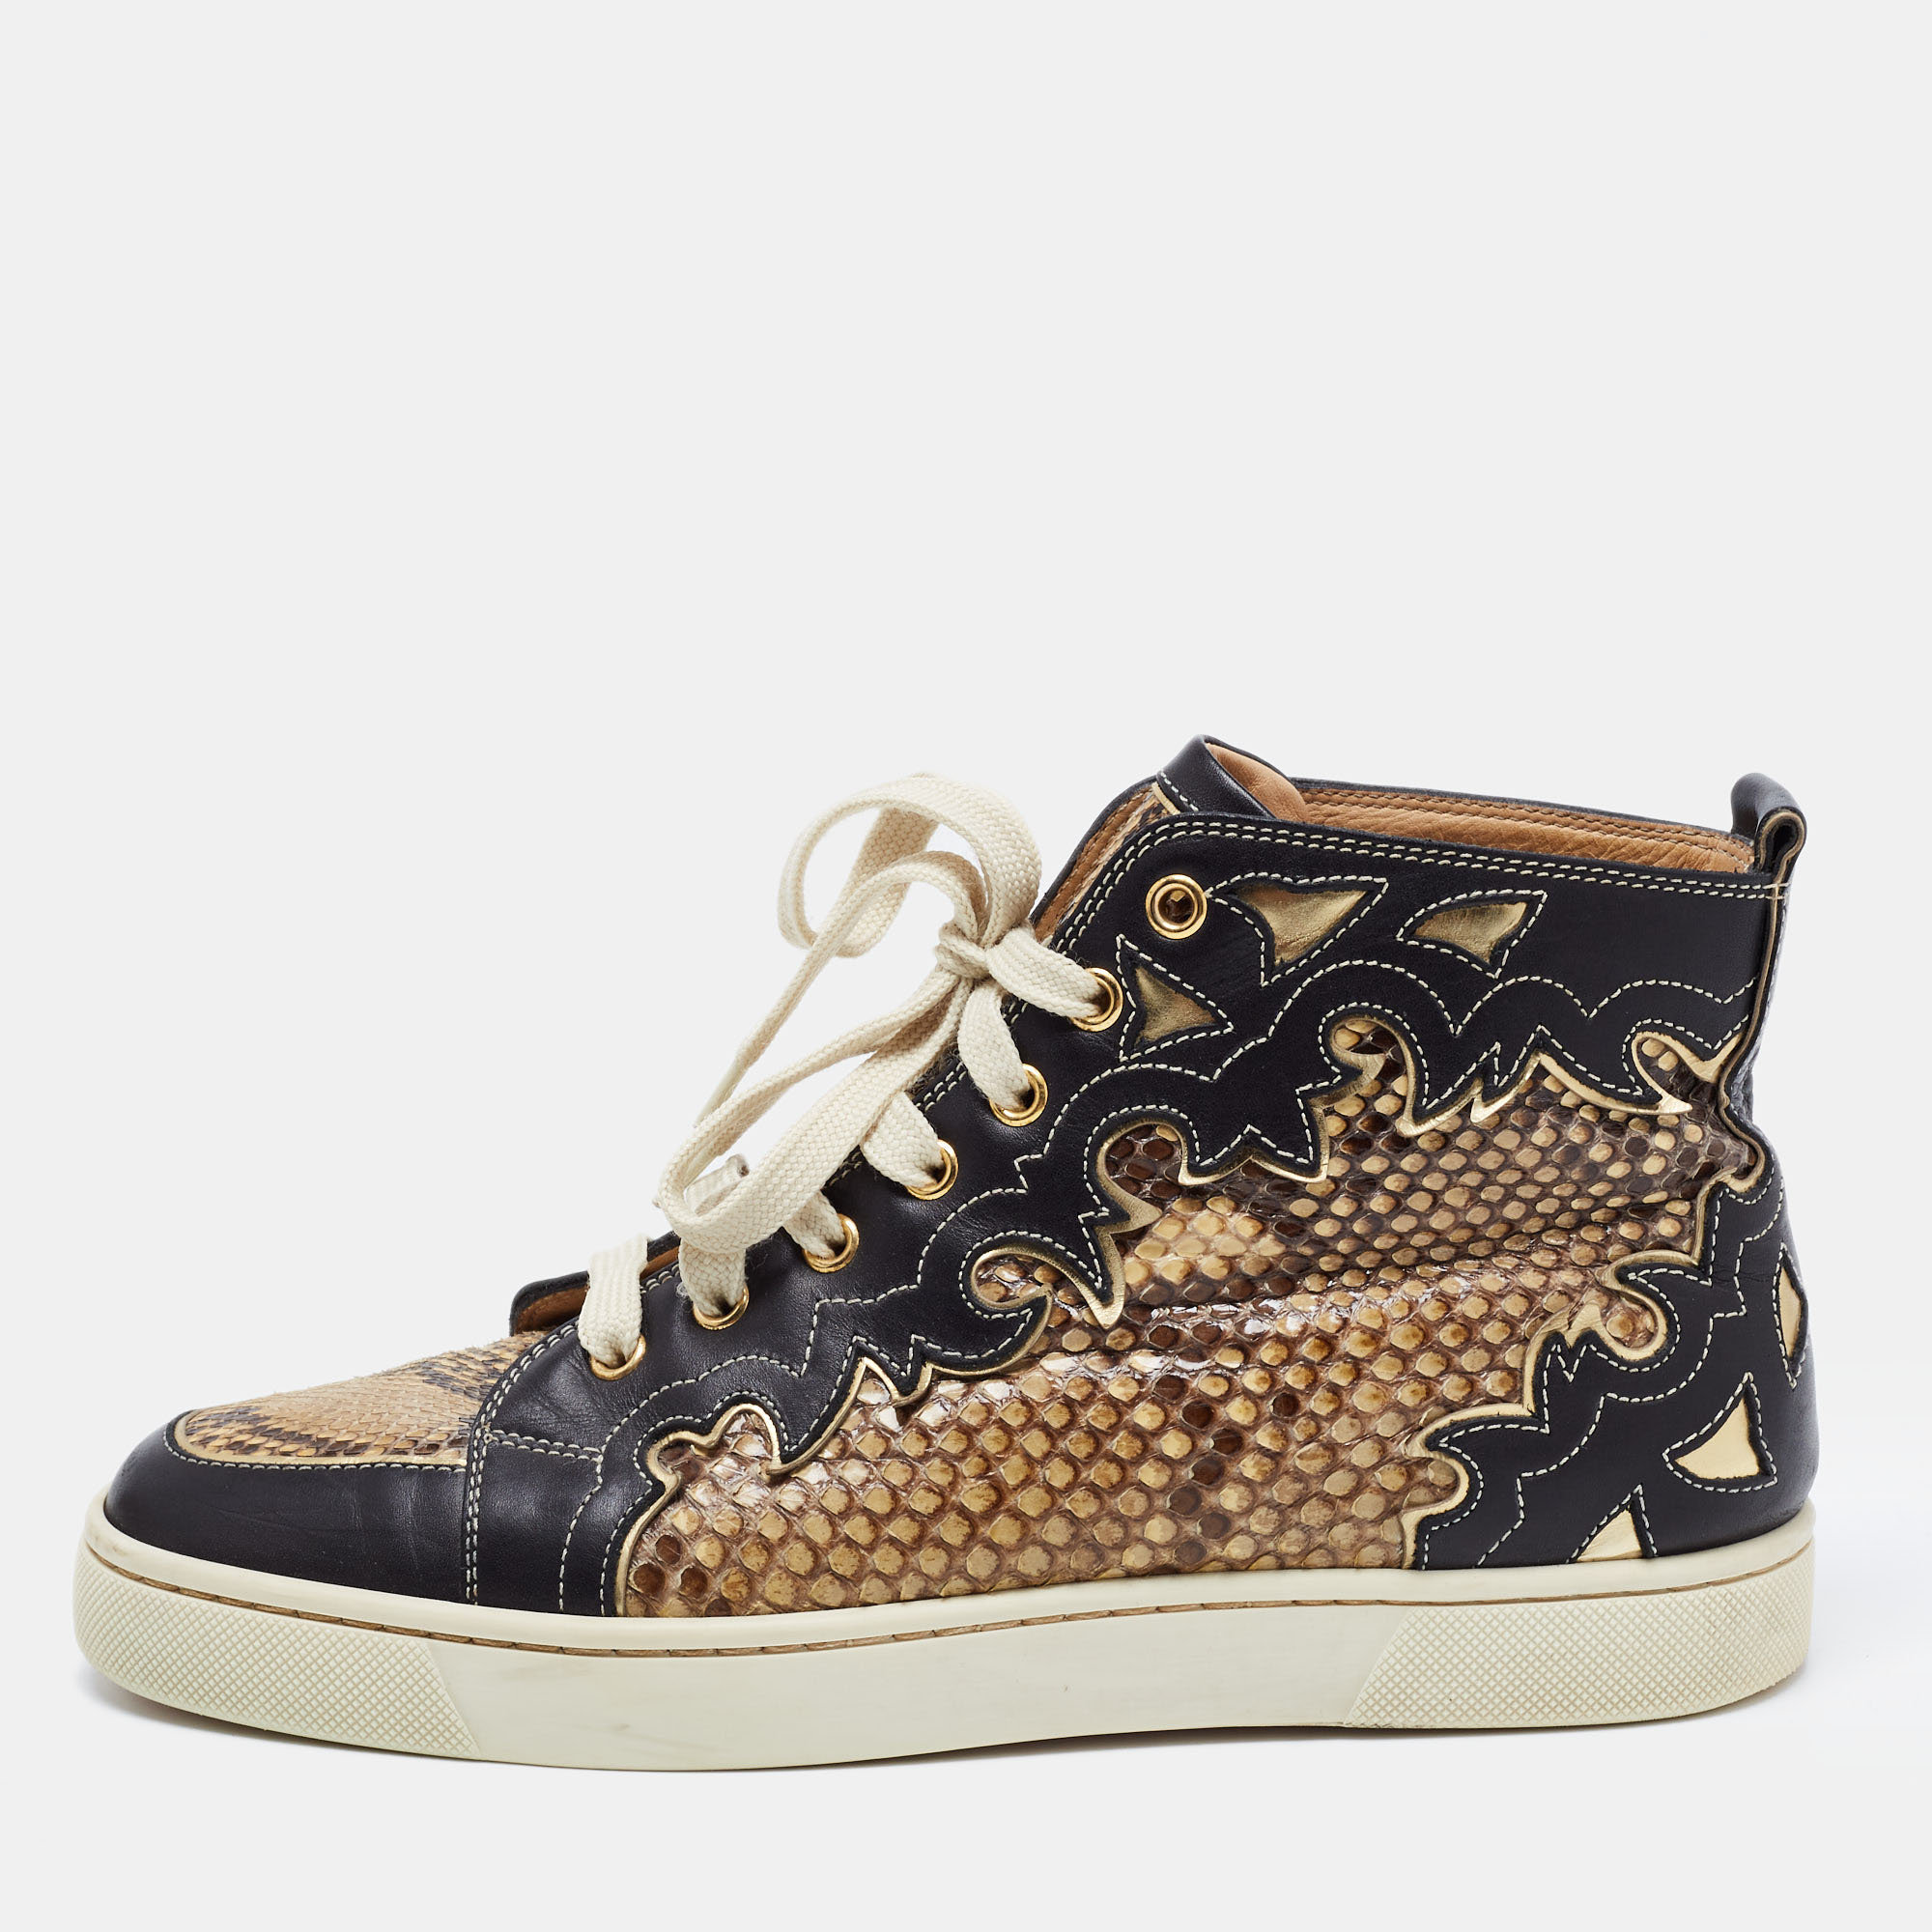 Pre-owned Christian Louboutin Tricolor Leather And Python Rantus Orlato High Top Sneakers Size 39.5 In Black